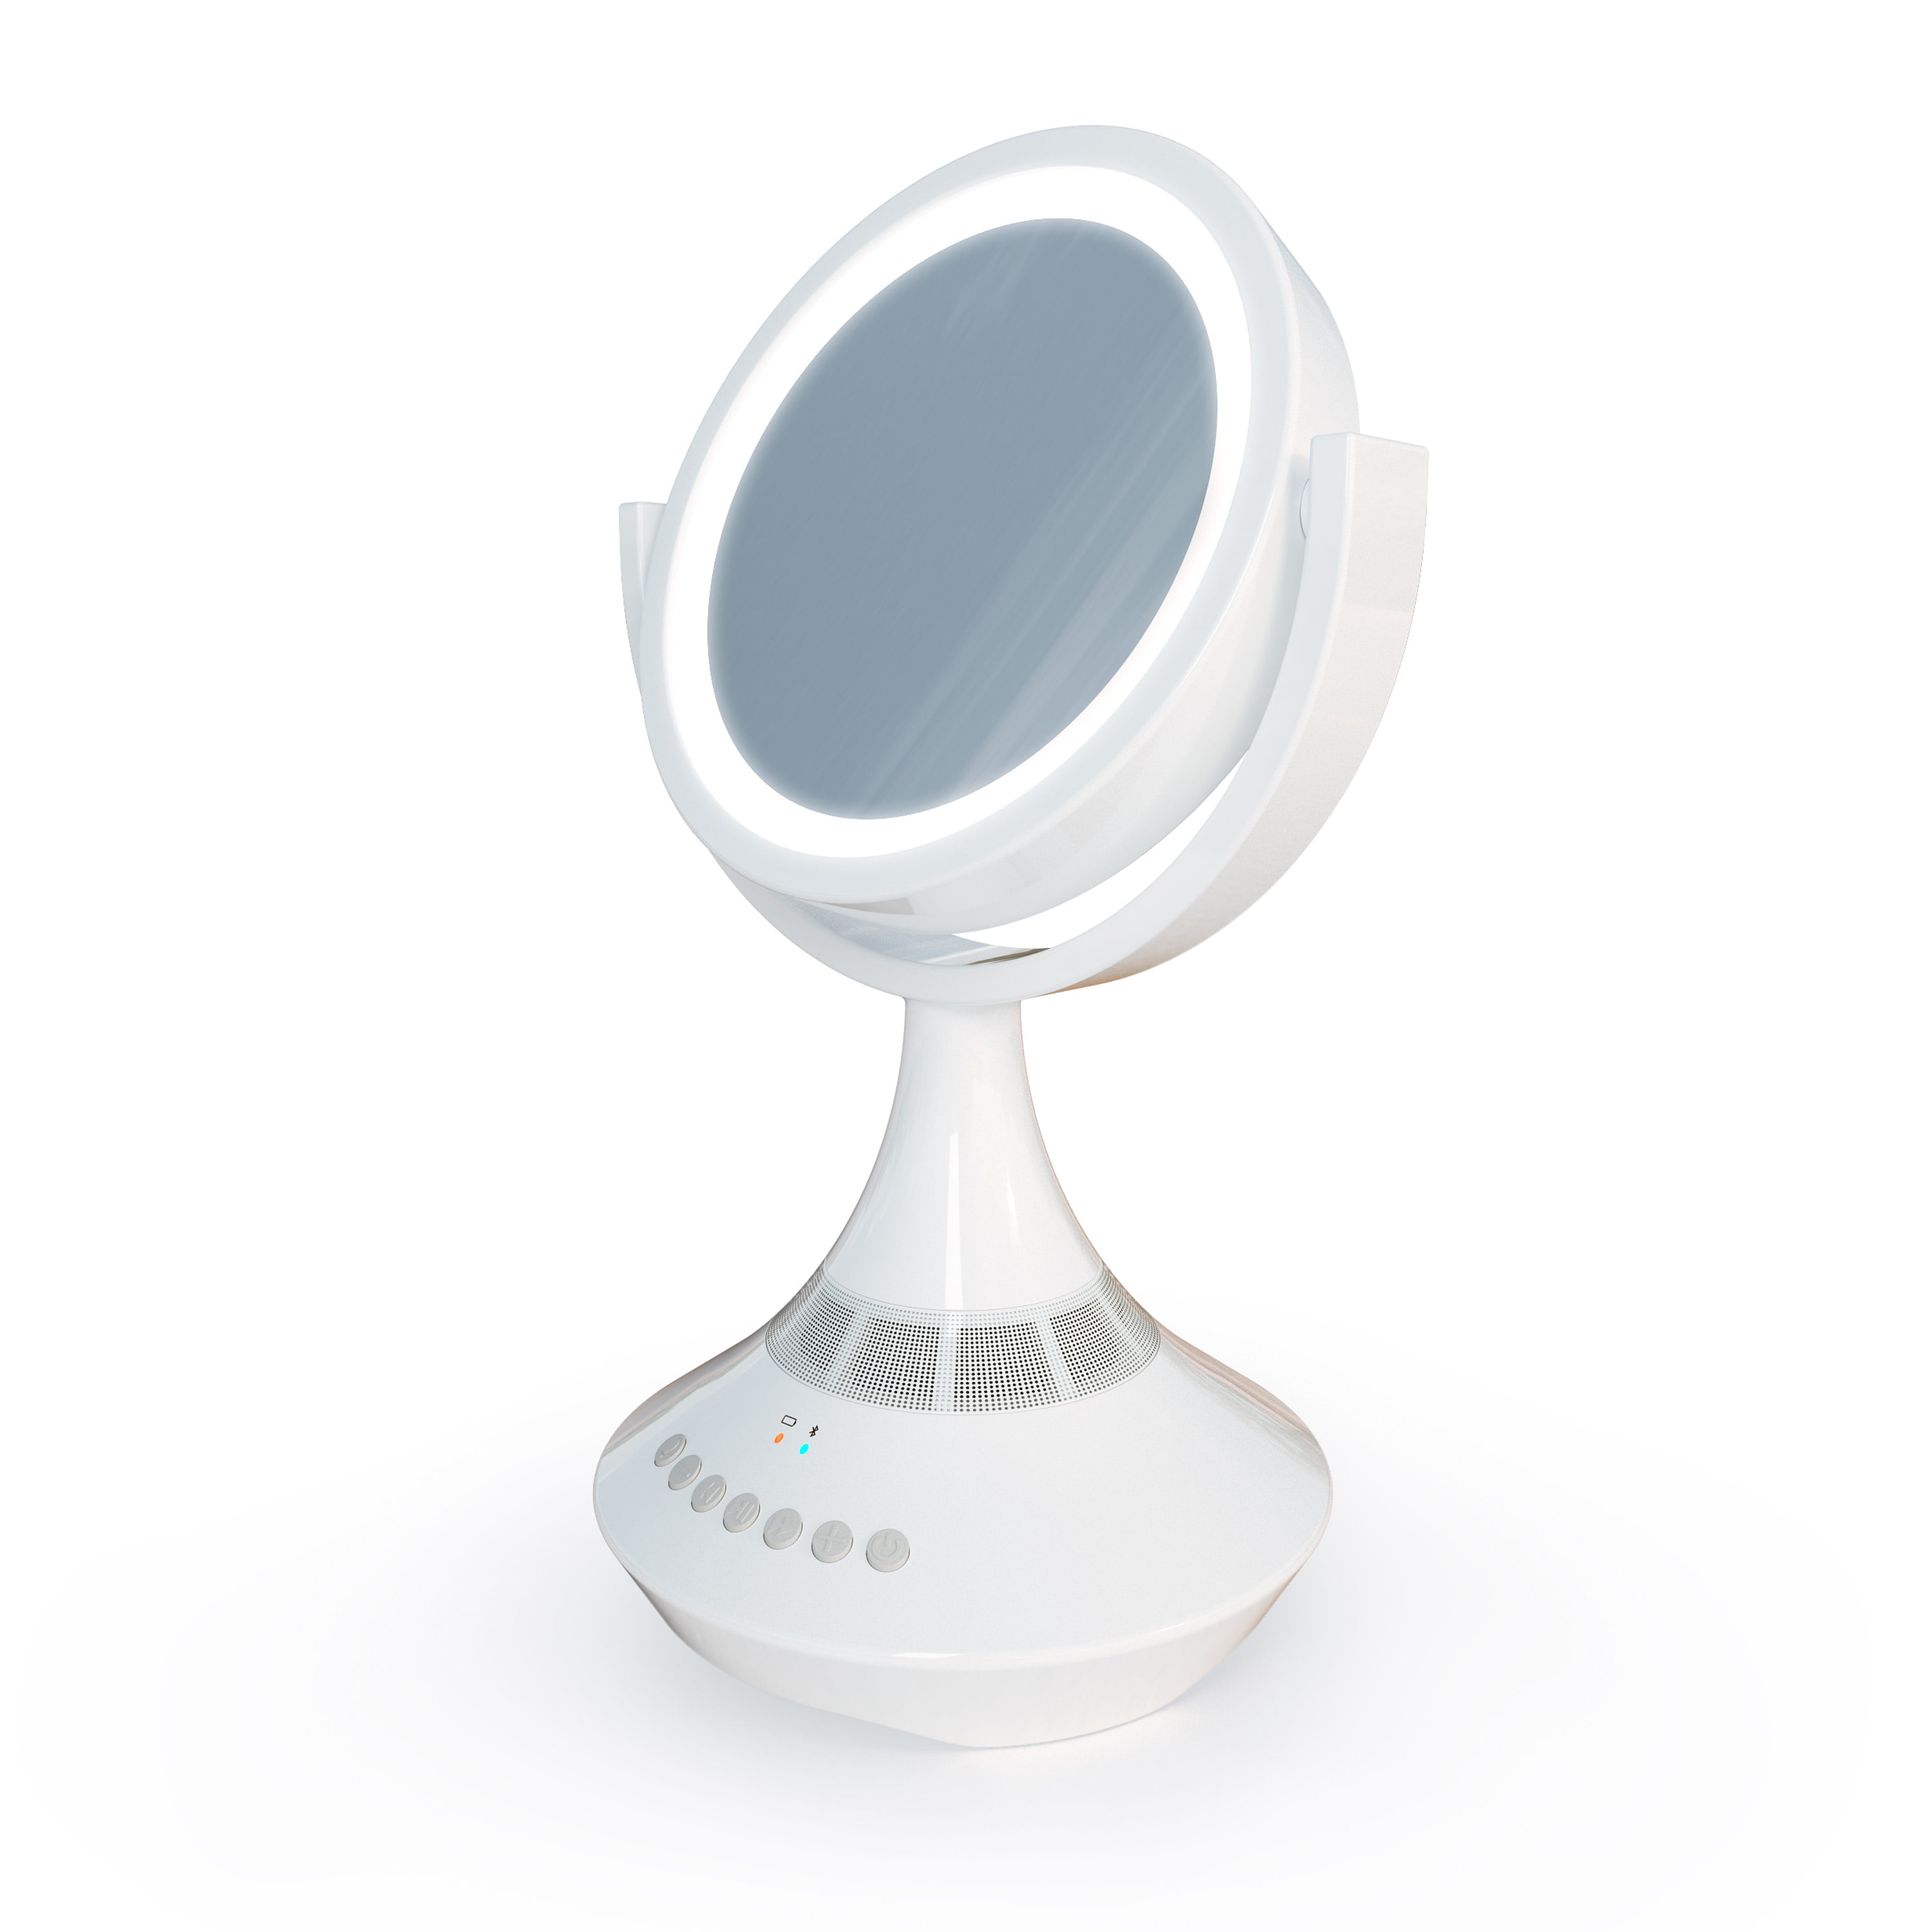 Atomi Bluetooth Double Sided Vanity, Small Cream Vanity Mirror With Lights And Bluetooth Speakers